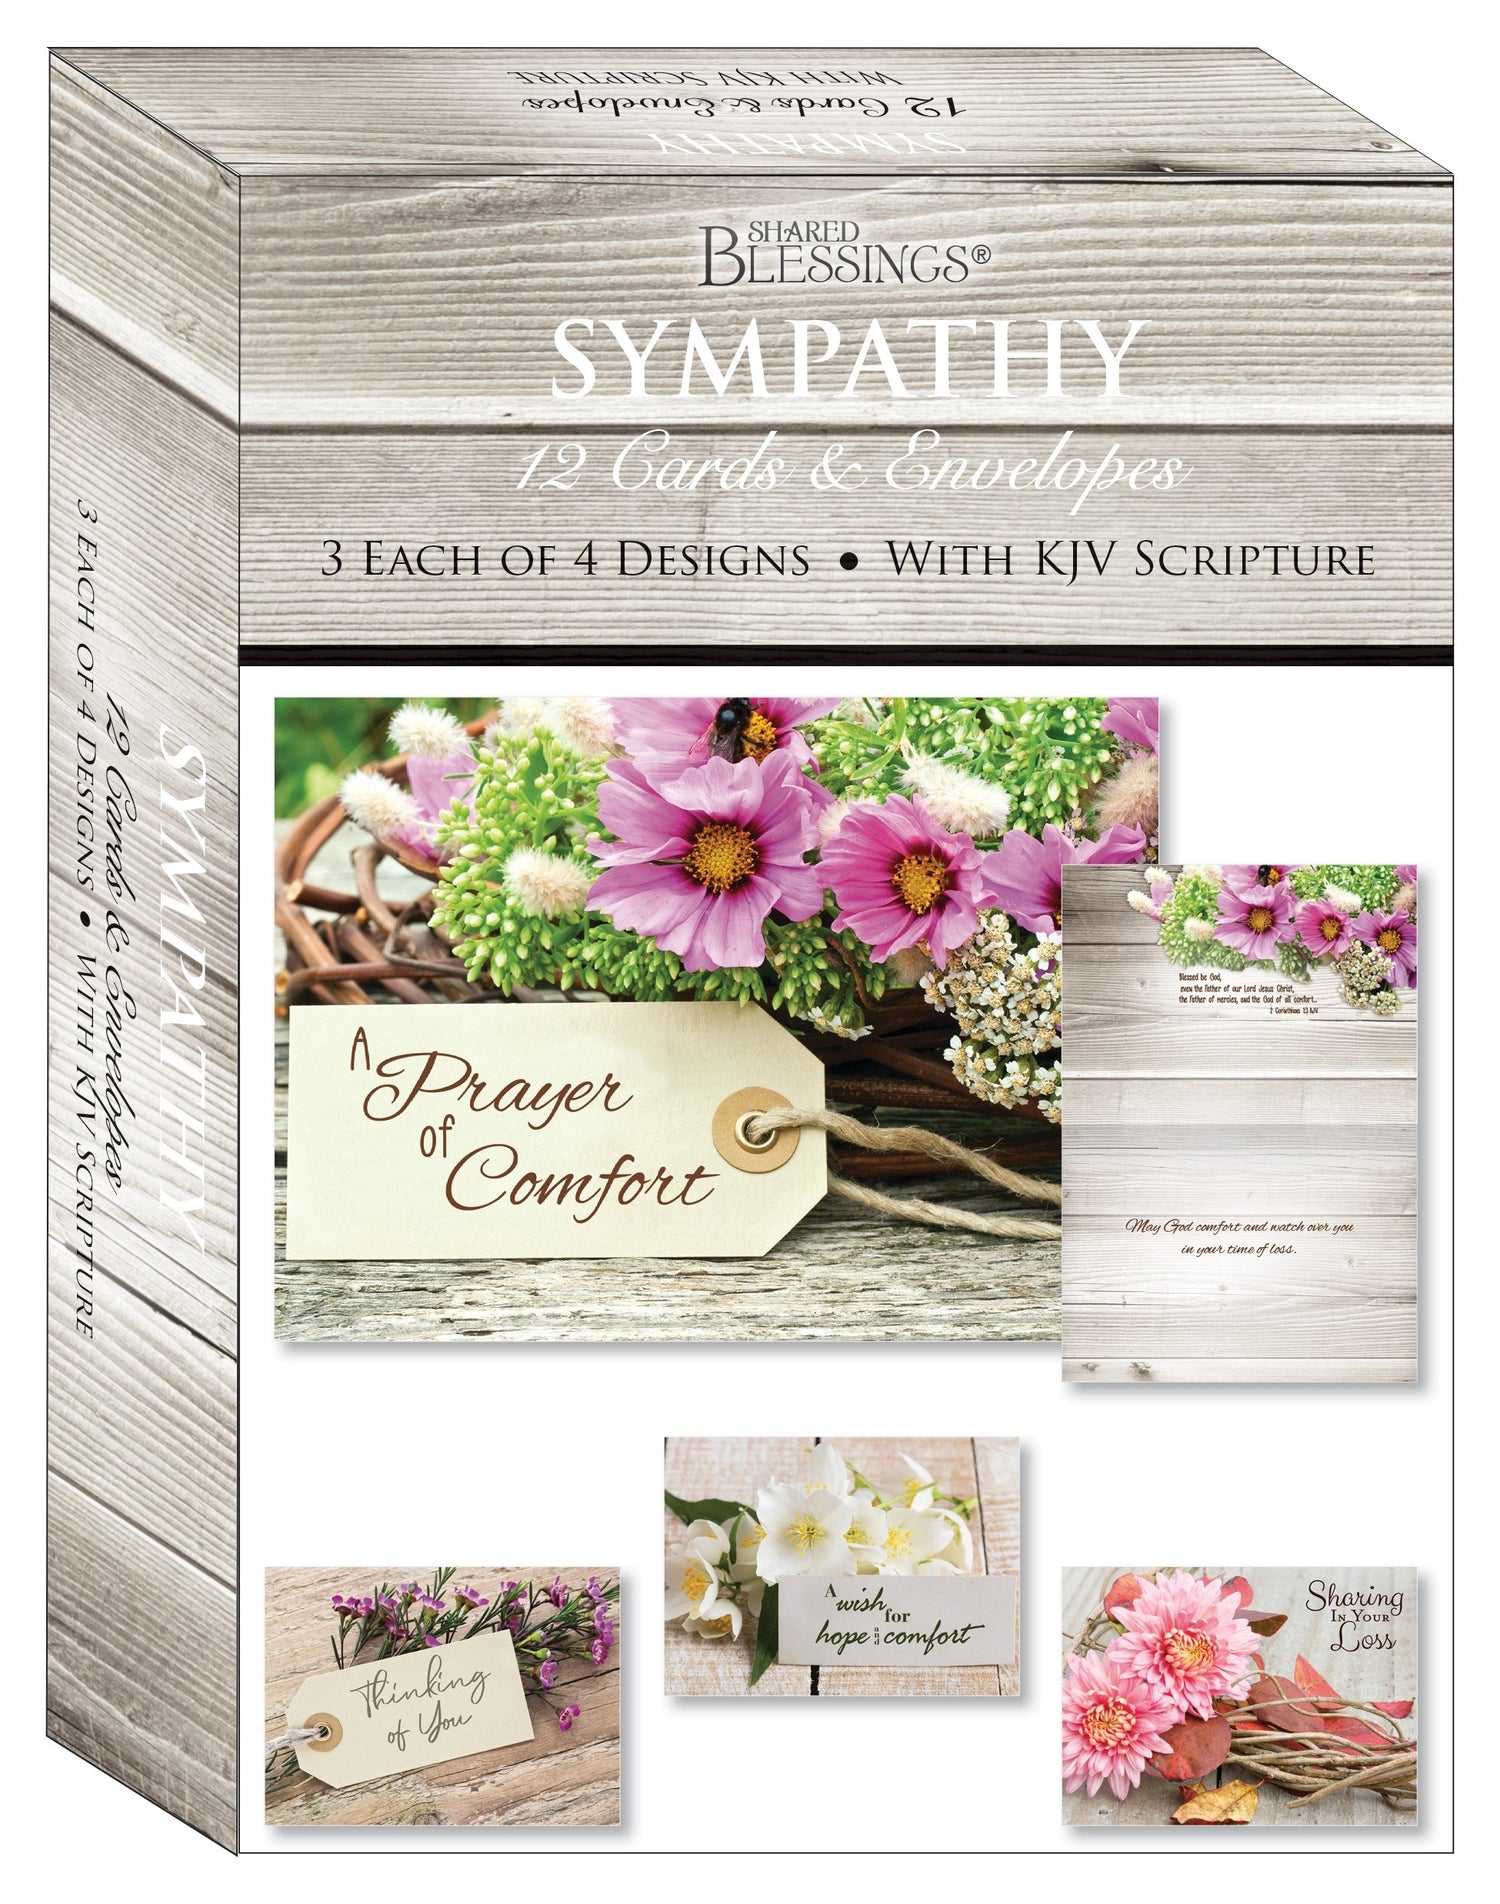 Seed of Abraham Christian Bookstore - (In)Courage - Card-Boxed-Shared Blessings-Sympathy Rustic Flowers (Box Of 12)